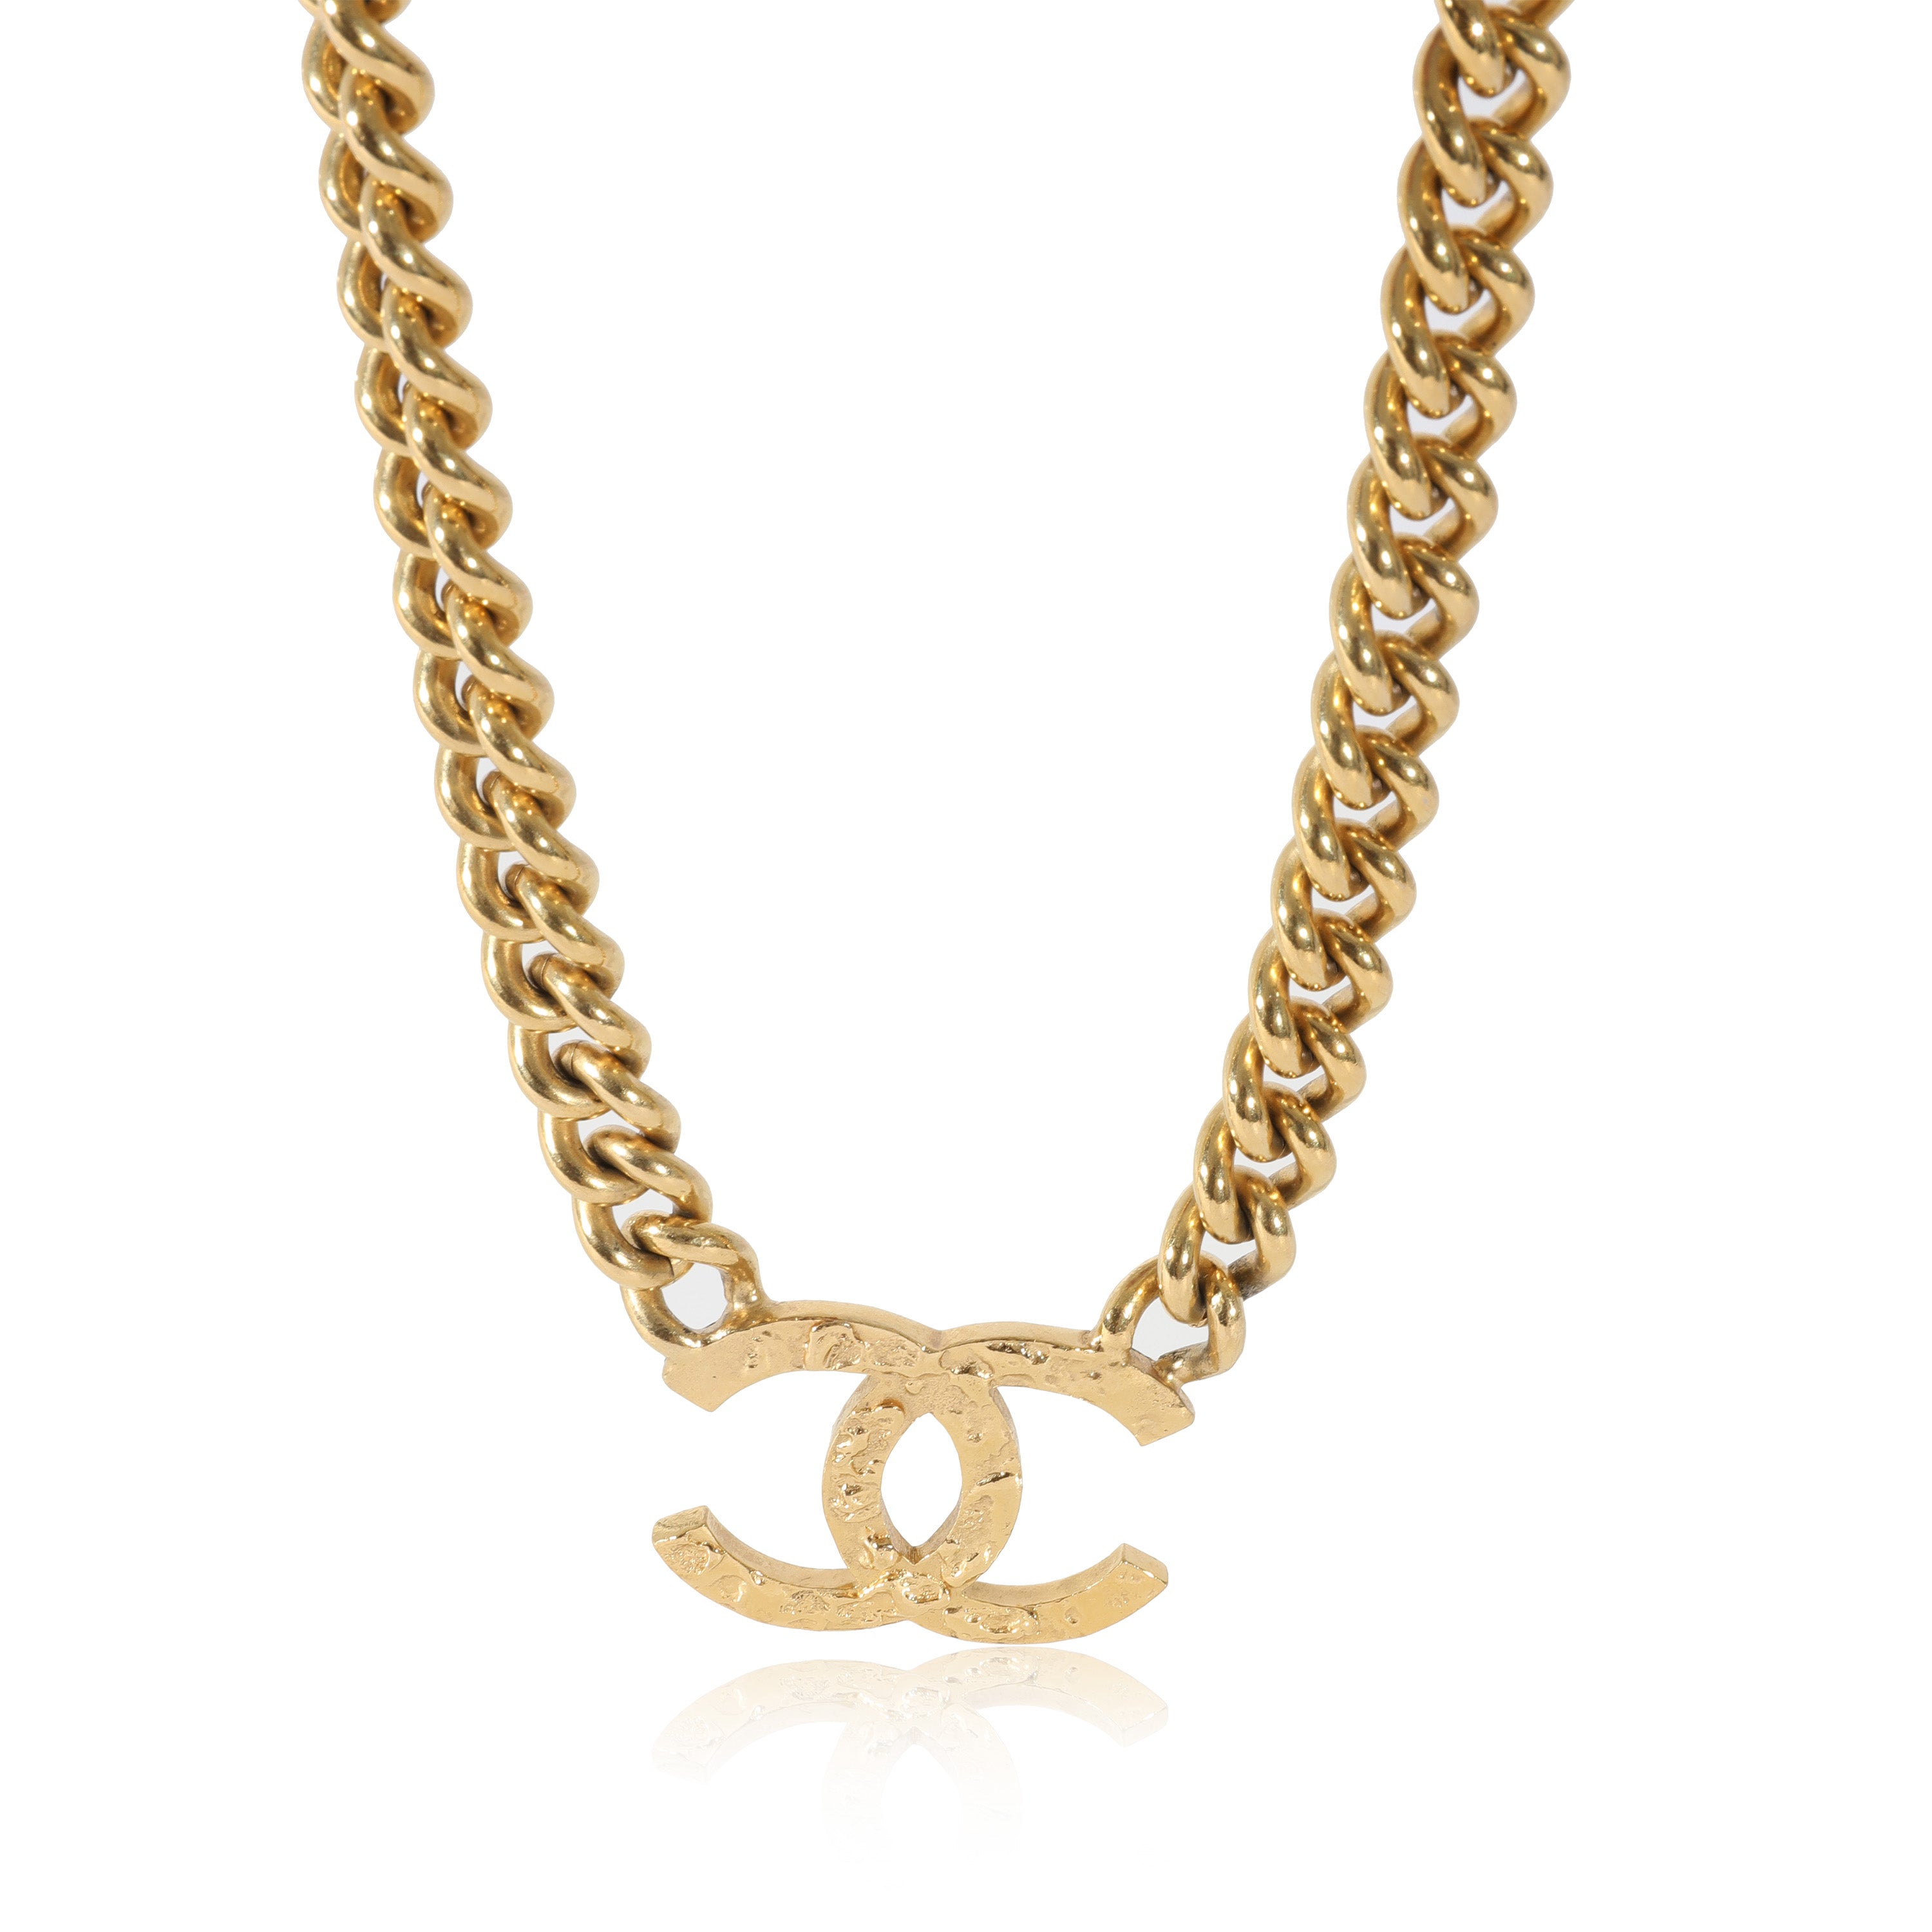 CHANEL CC TURNLOCK GOLD THICK CHAIN CHOKER NECKLACE